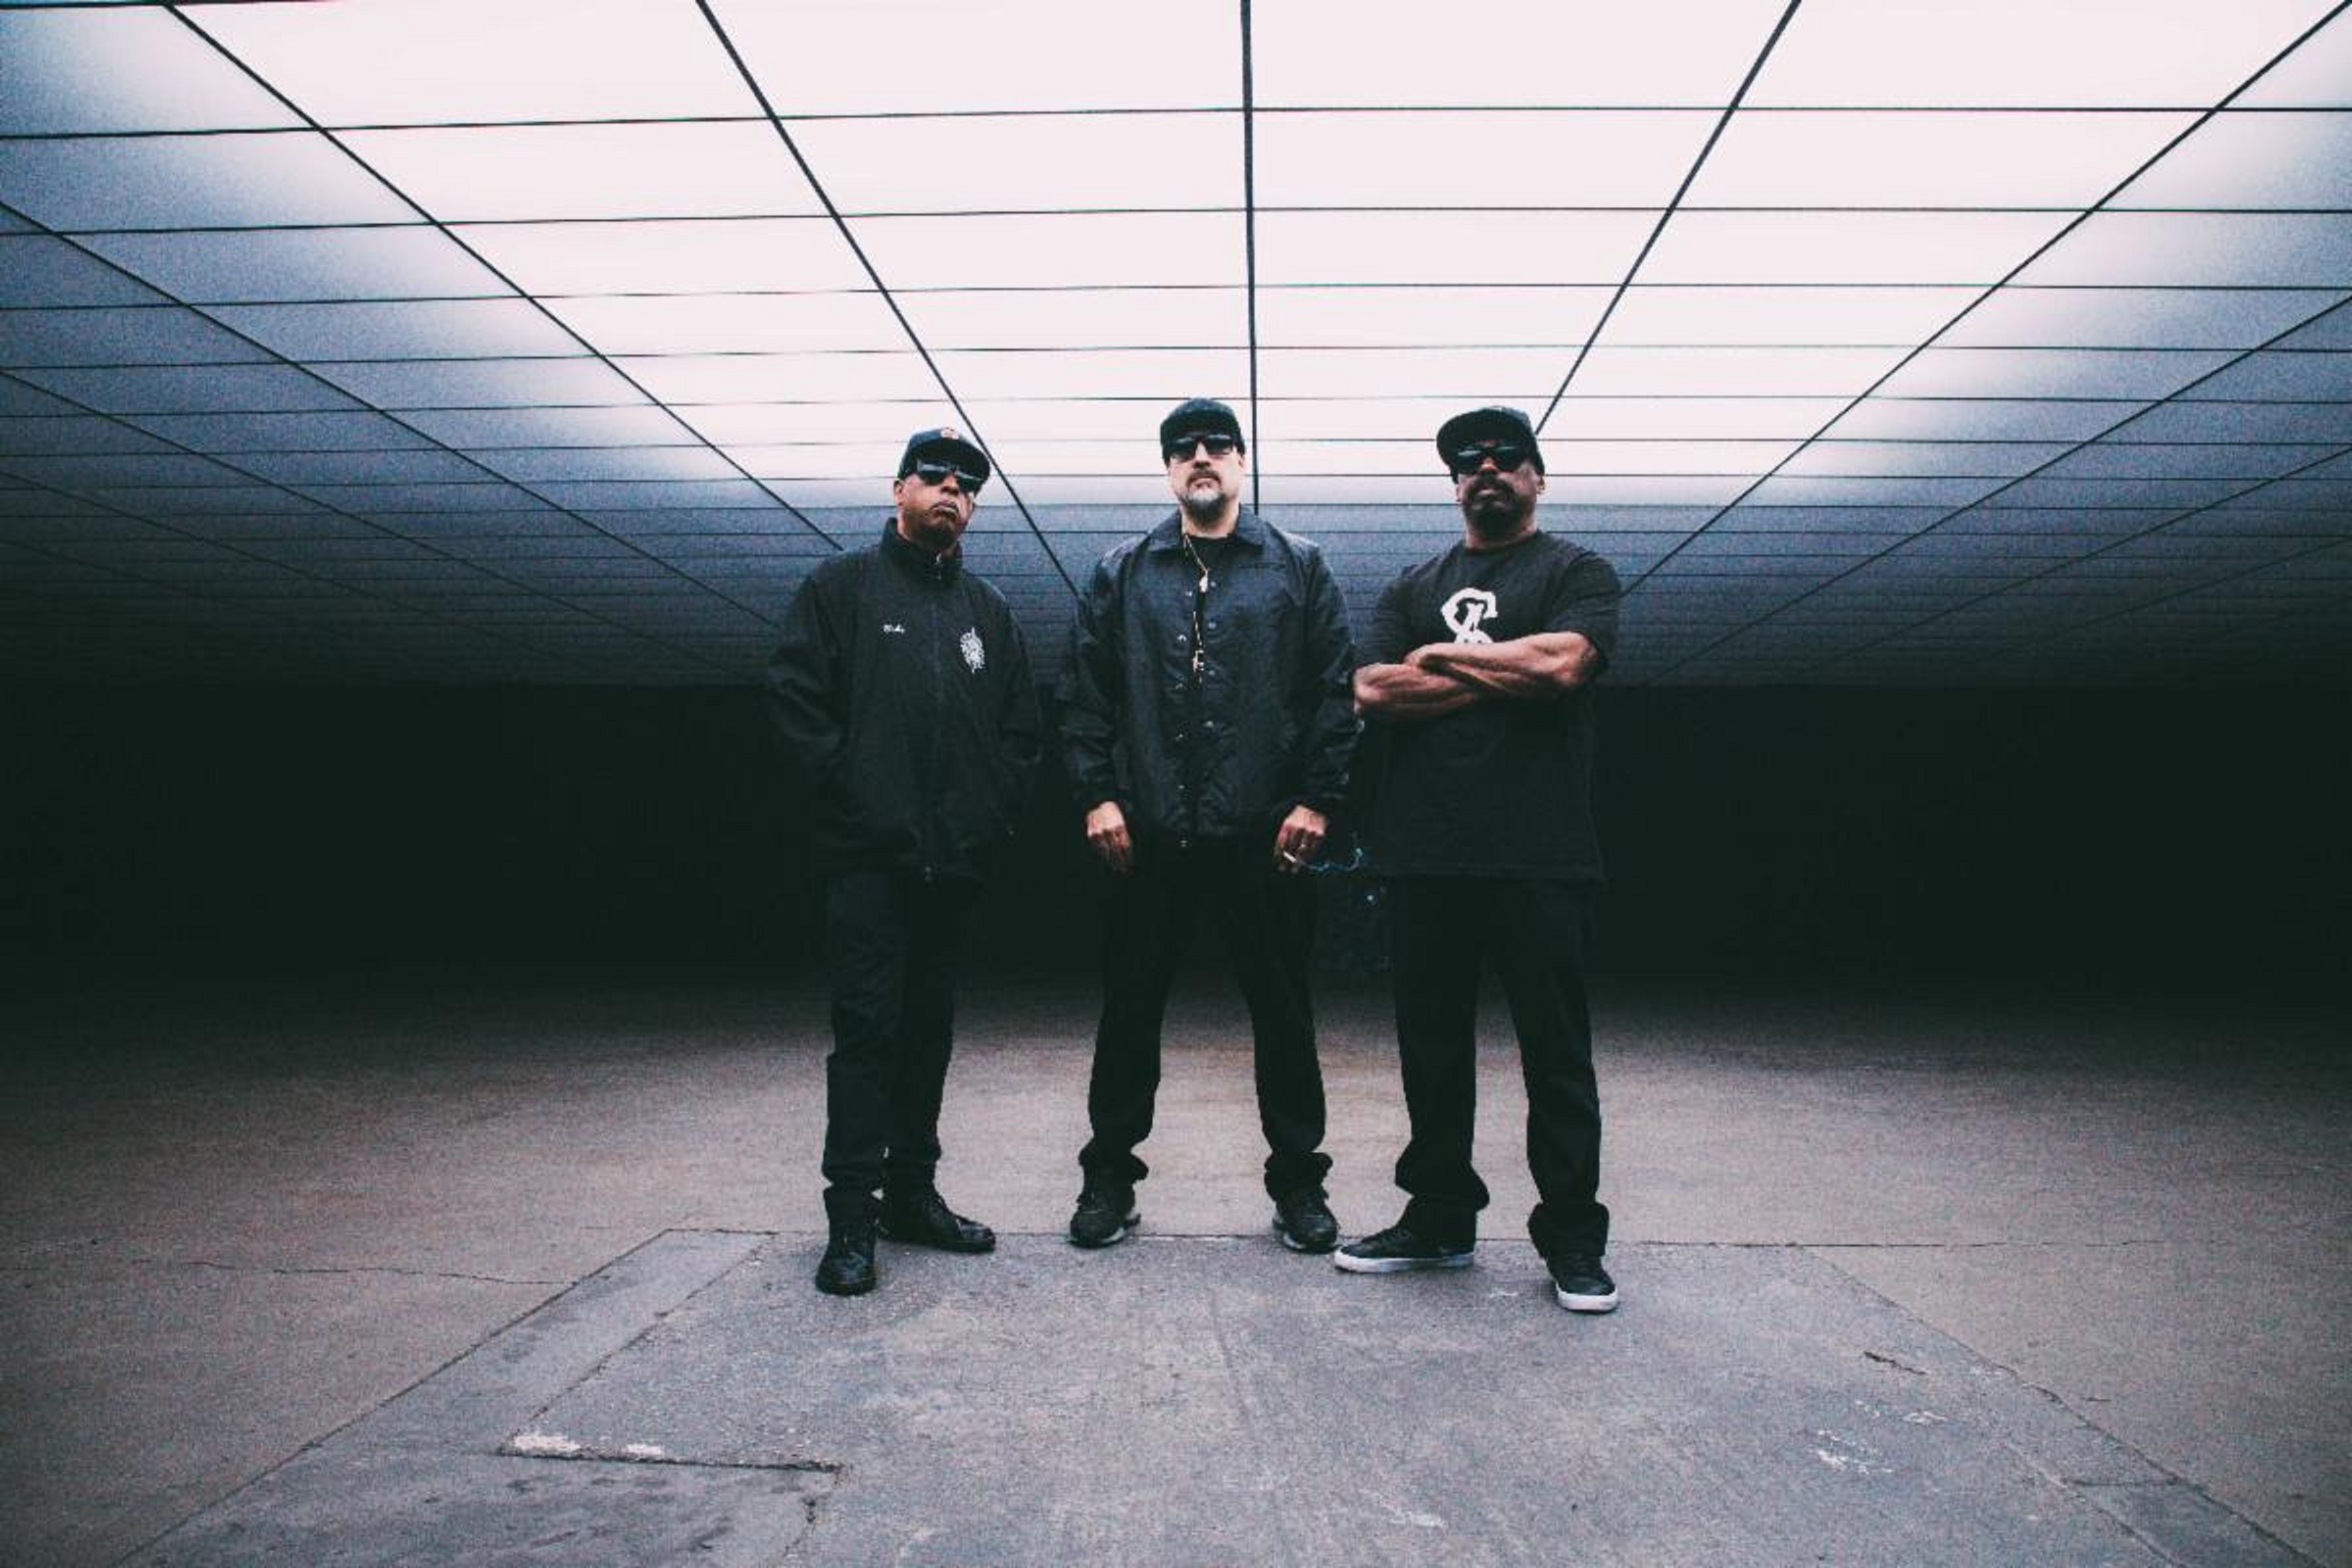 Cypress Hill announces new album, shares new track "Bye Bye" feat. Dizzy Wright